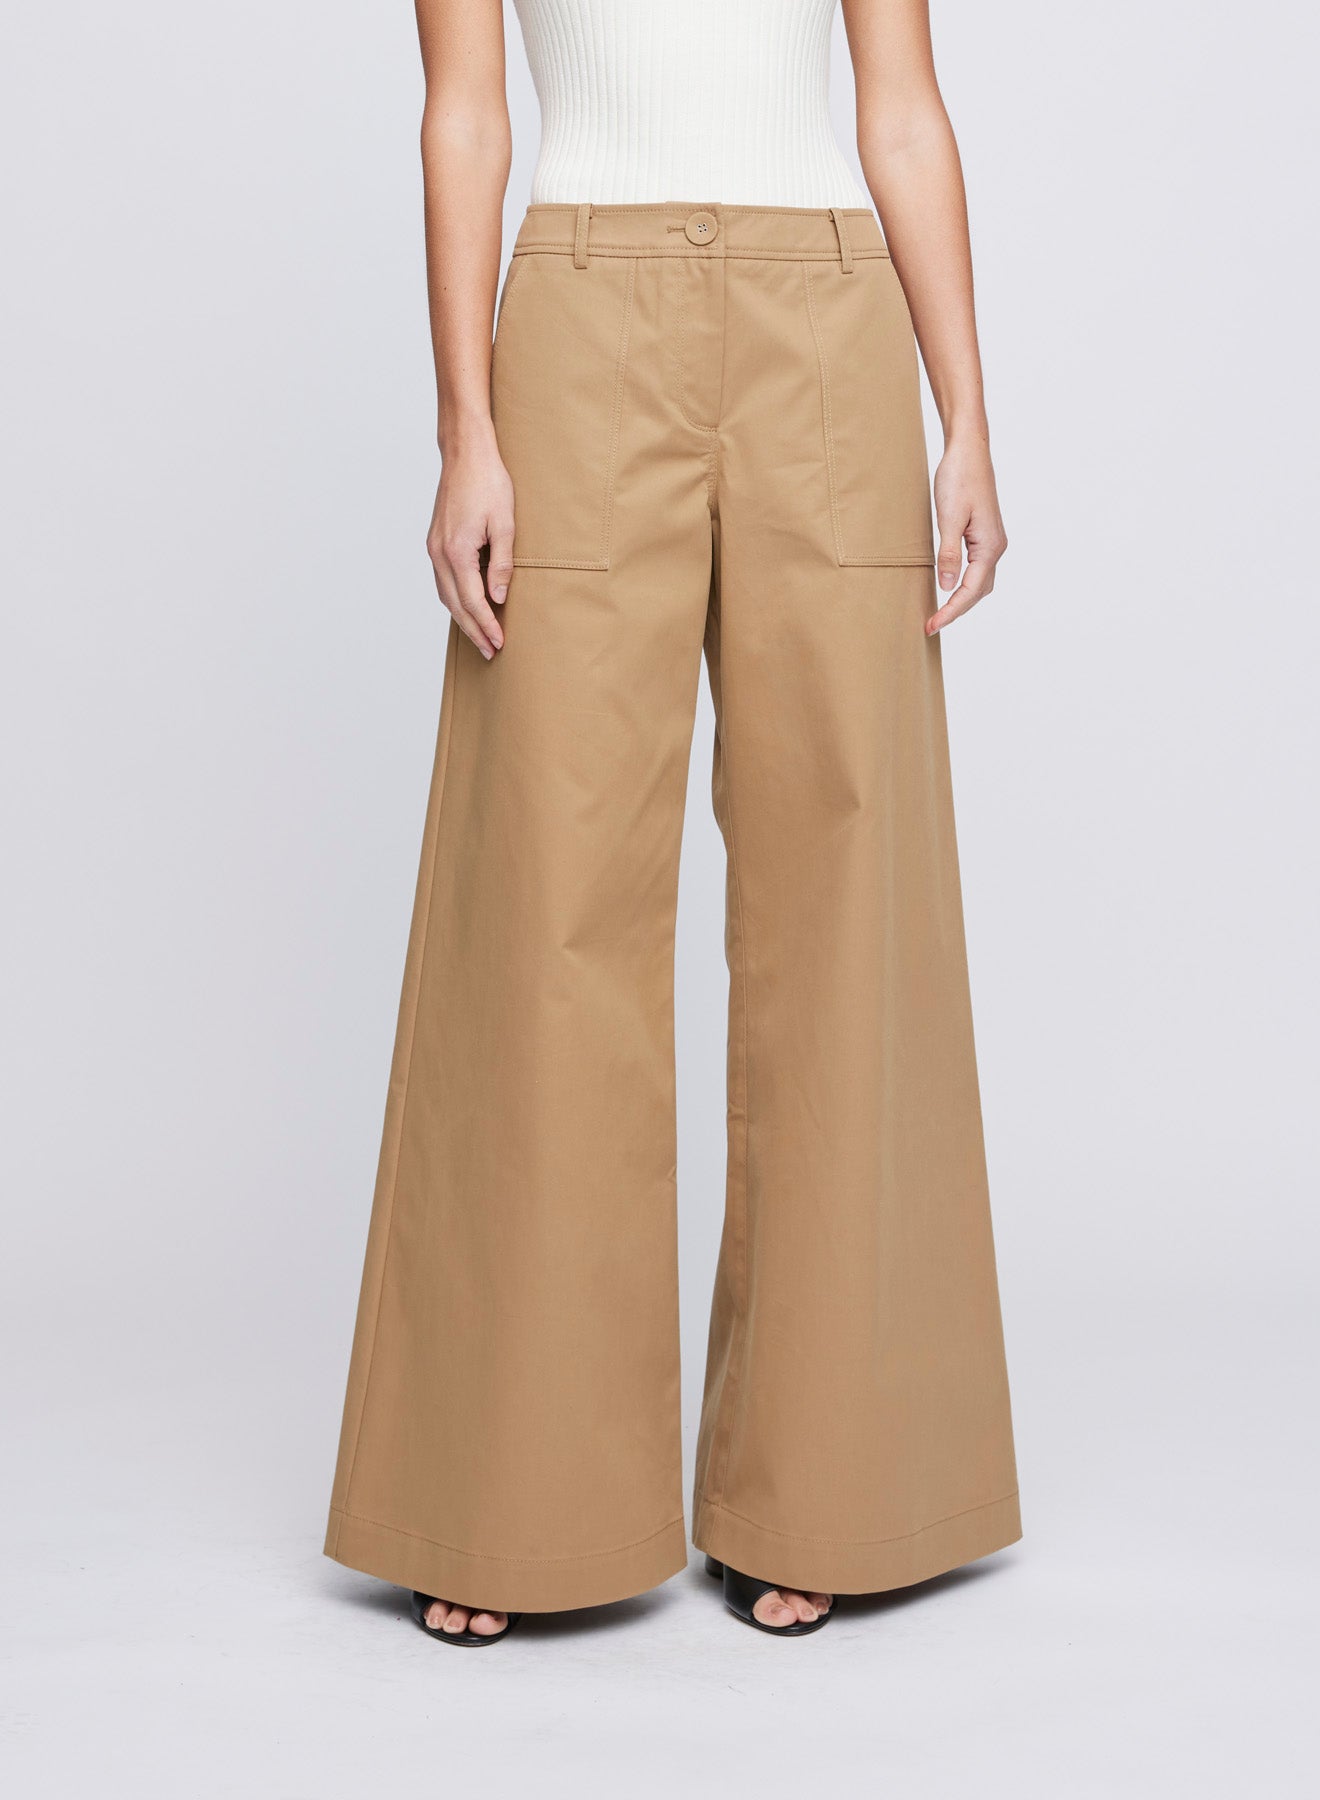 The ANNA QUAN Sloane Pants in Tan are crafted in a canvas linen material that sit mid-rise on the waist and have a wide leg fit.